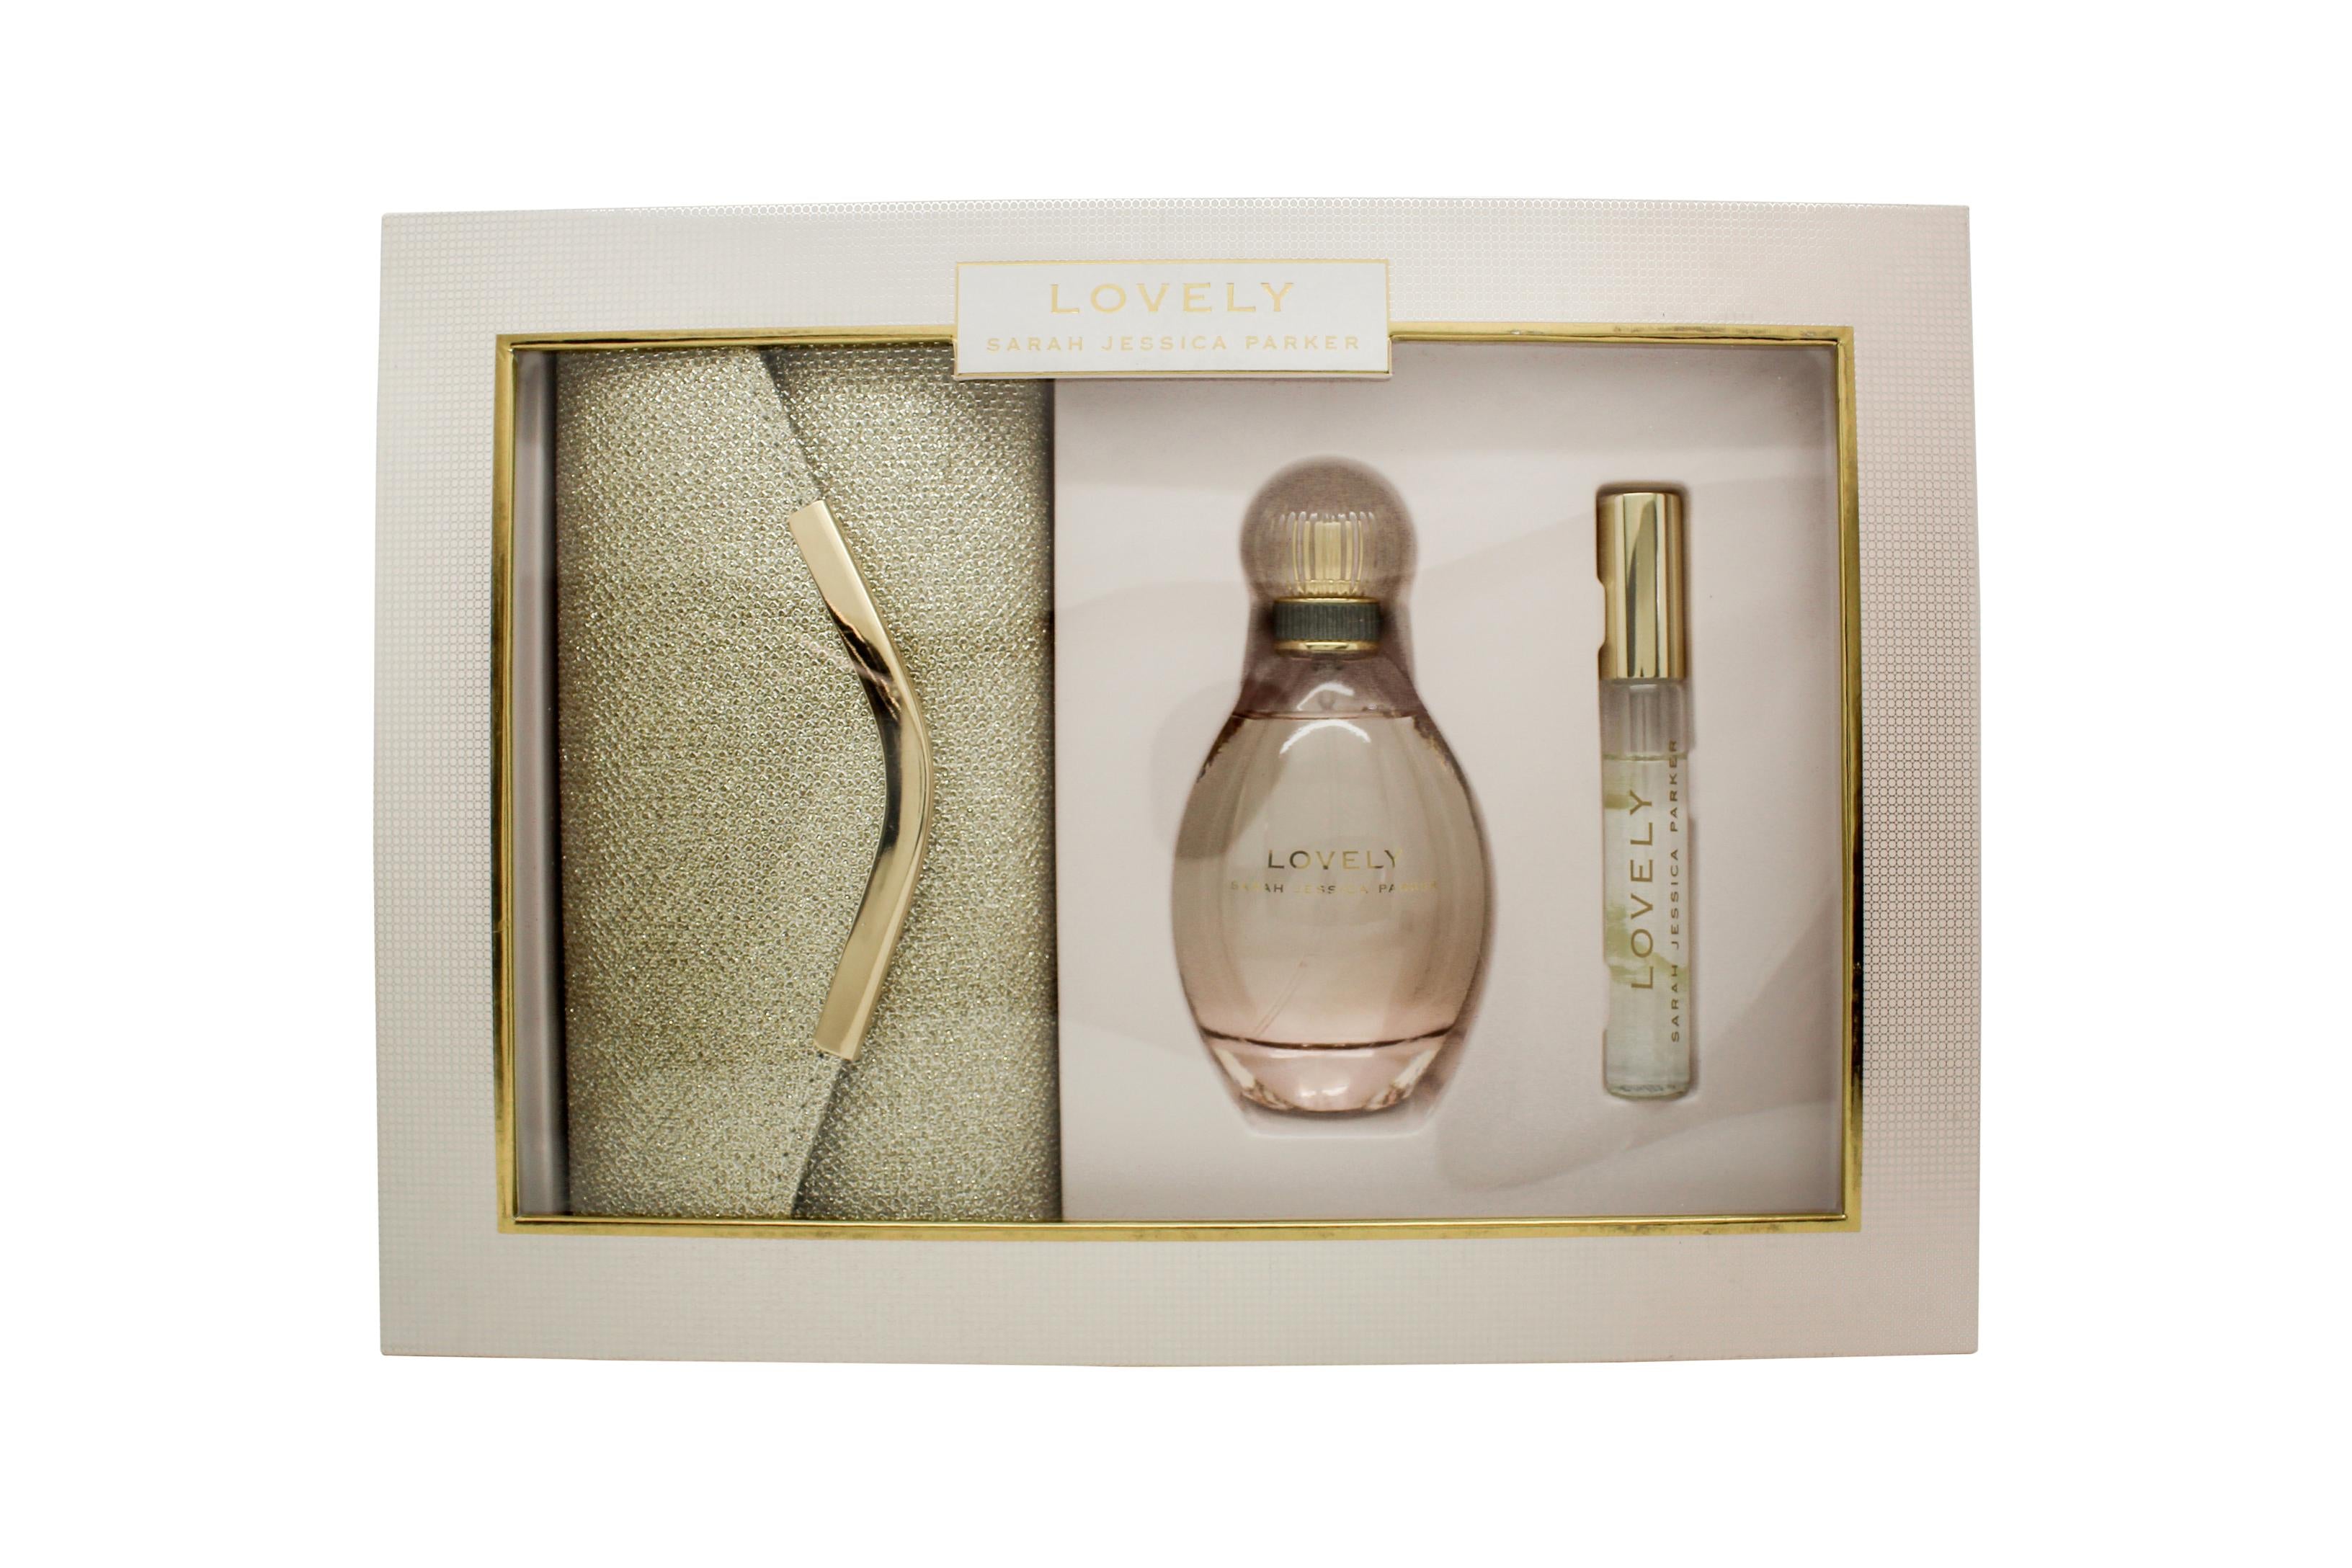 View Sarah Jessica Parker Lovely Gift Set 100ml EDP 10ml Rollerball Gold Clutch information